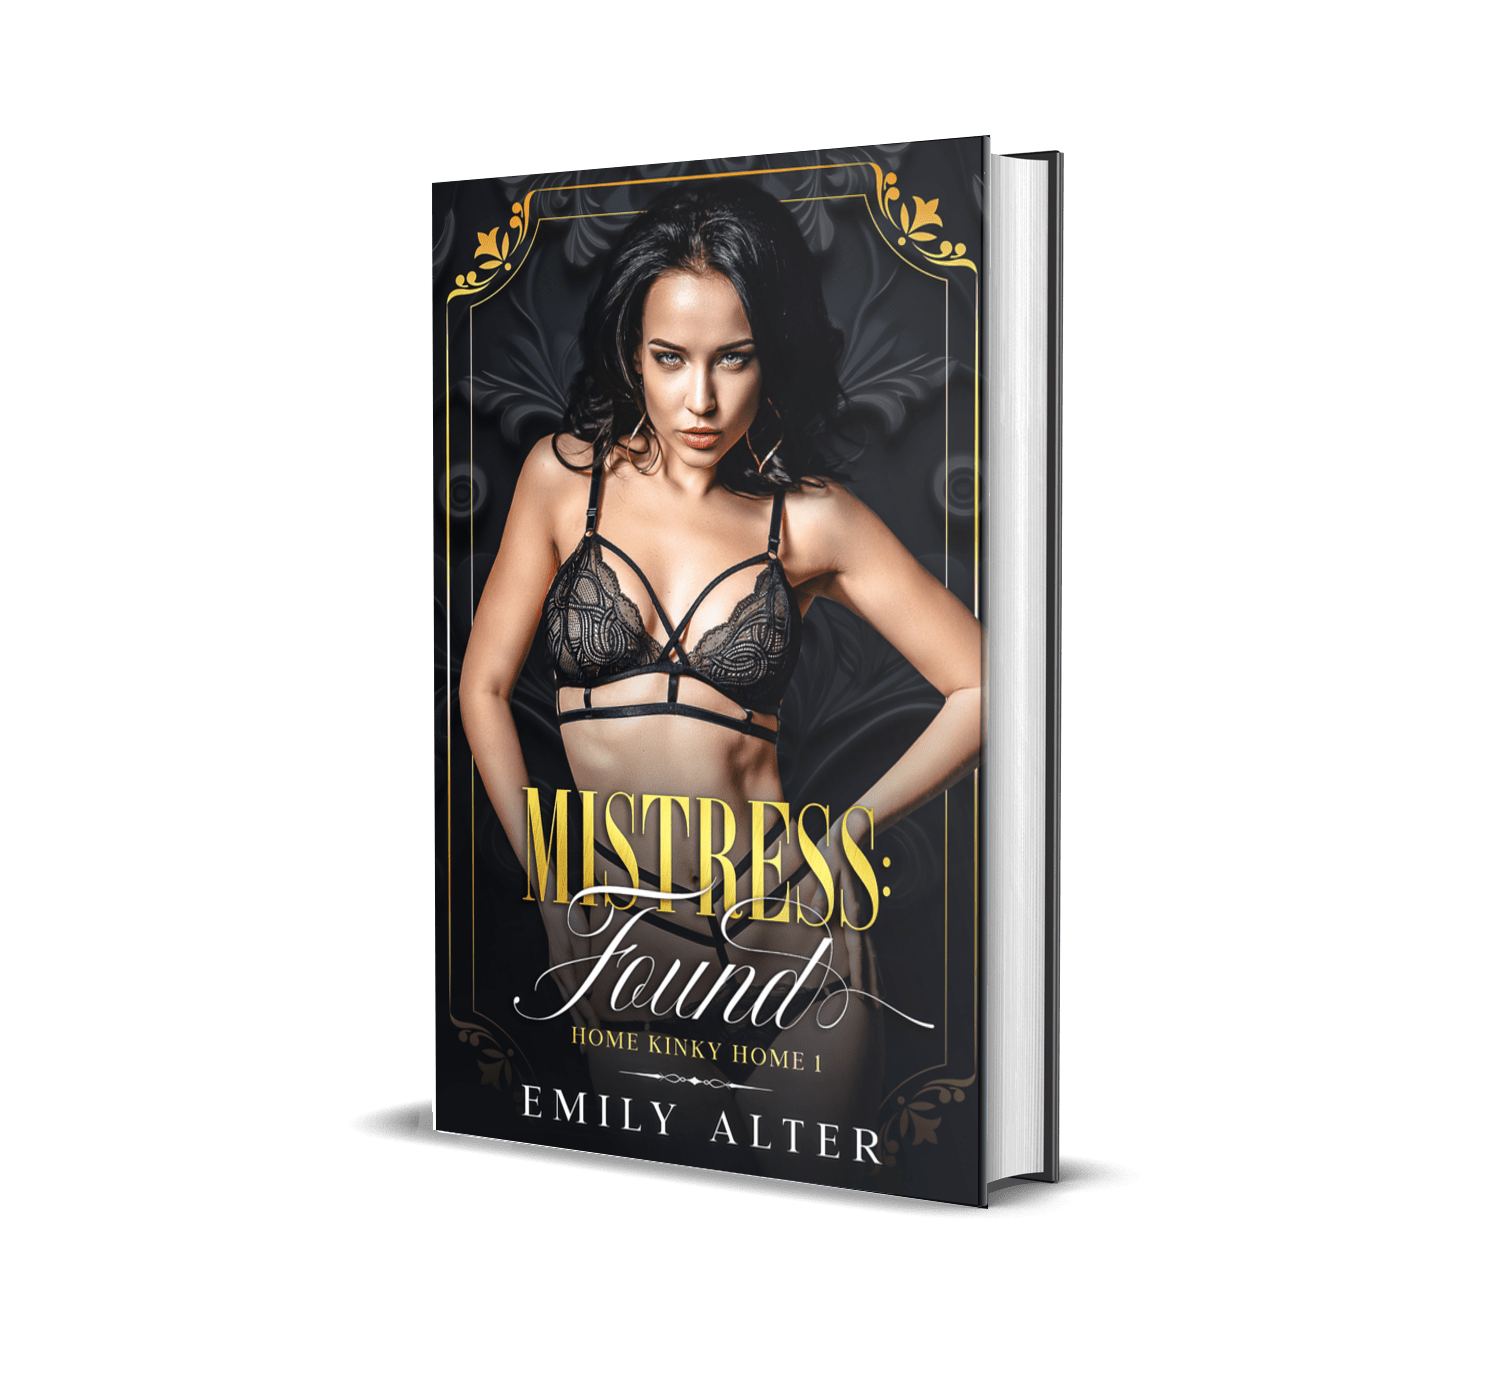 Mistress Found: sapphic romance book by Emily Alter